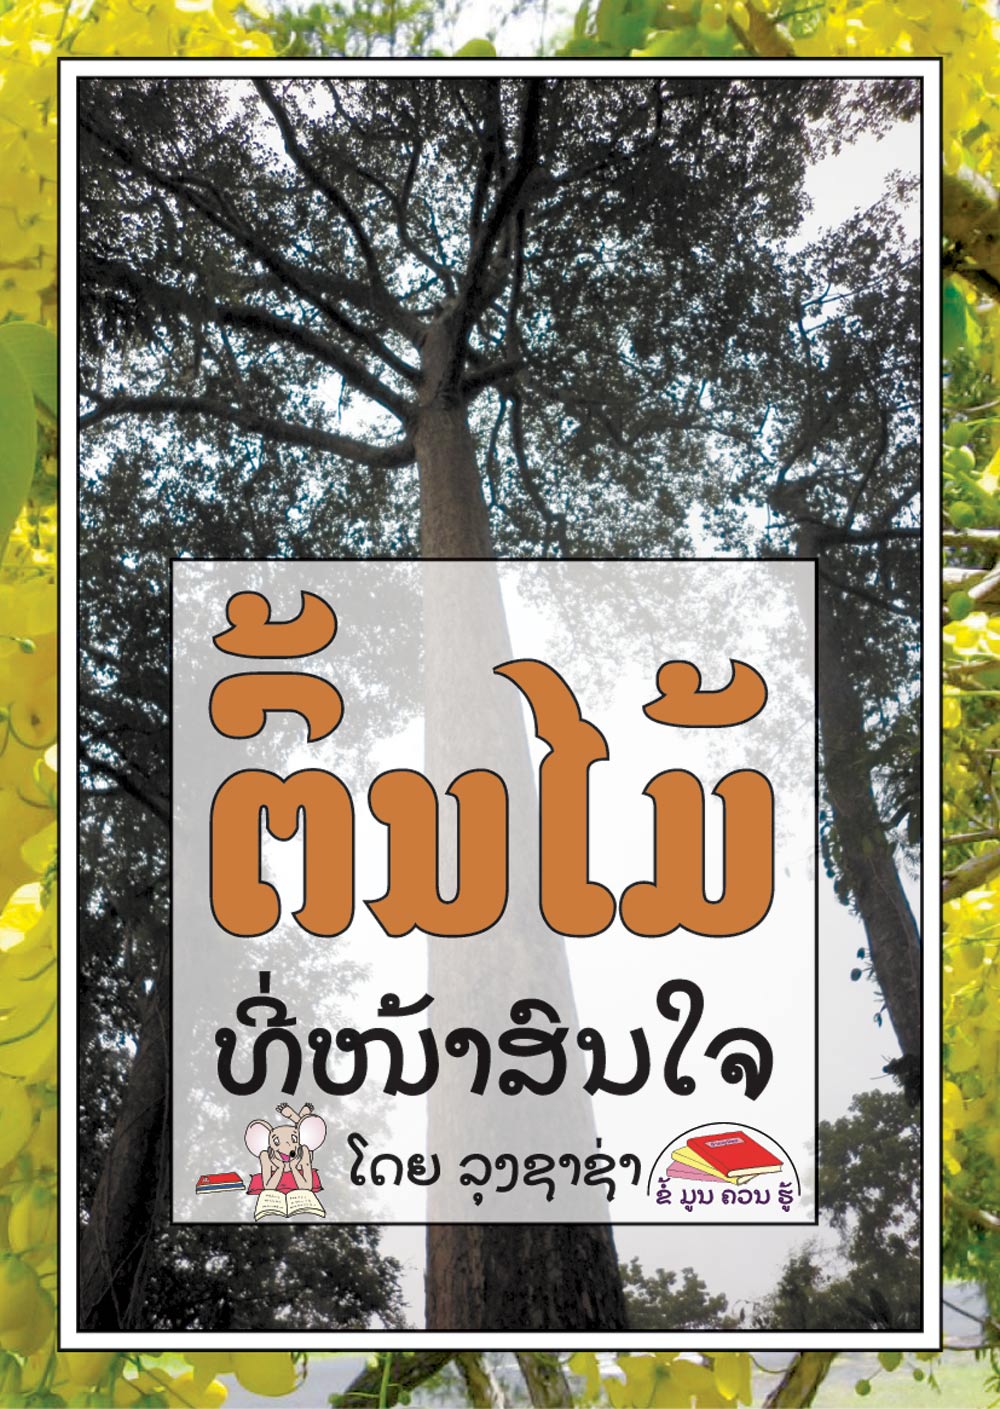 Trees are Fascinating! large book cover, published in Lao language